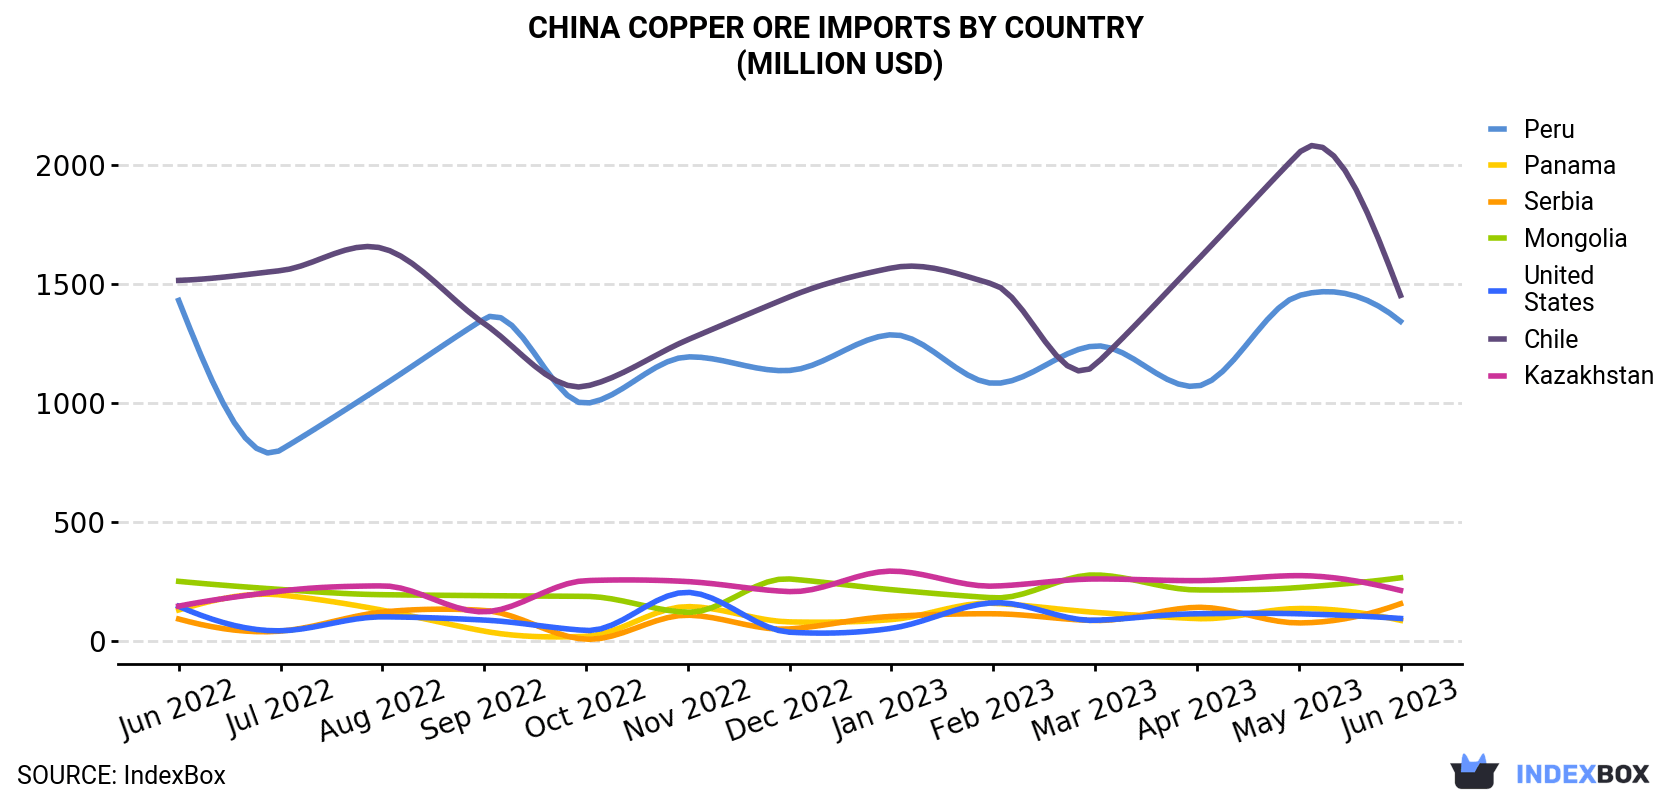 China Copper Ore Imports By Country (Million USD)